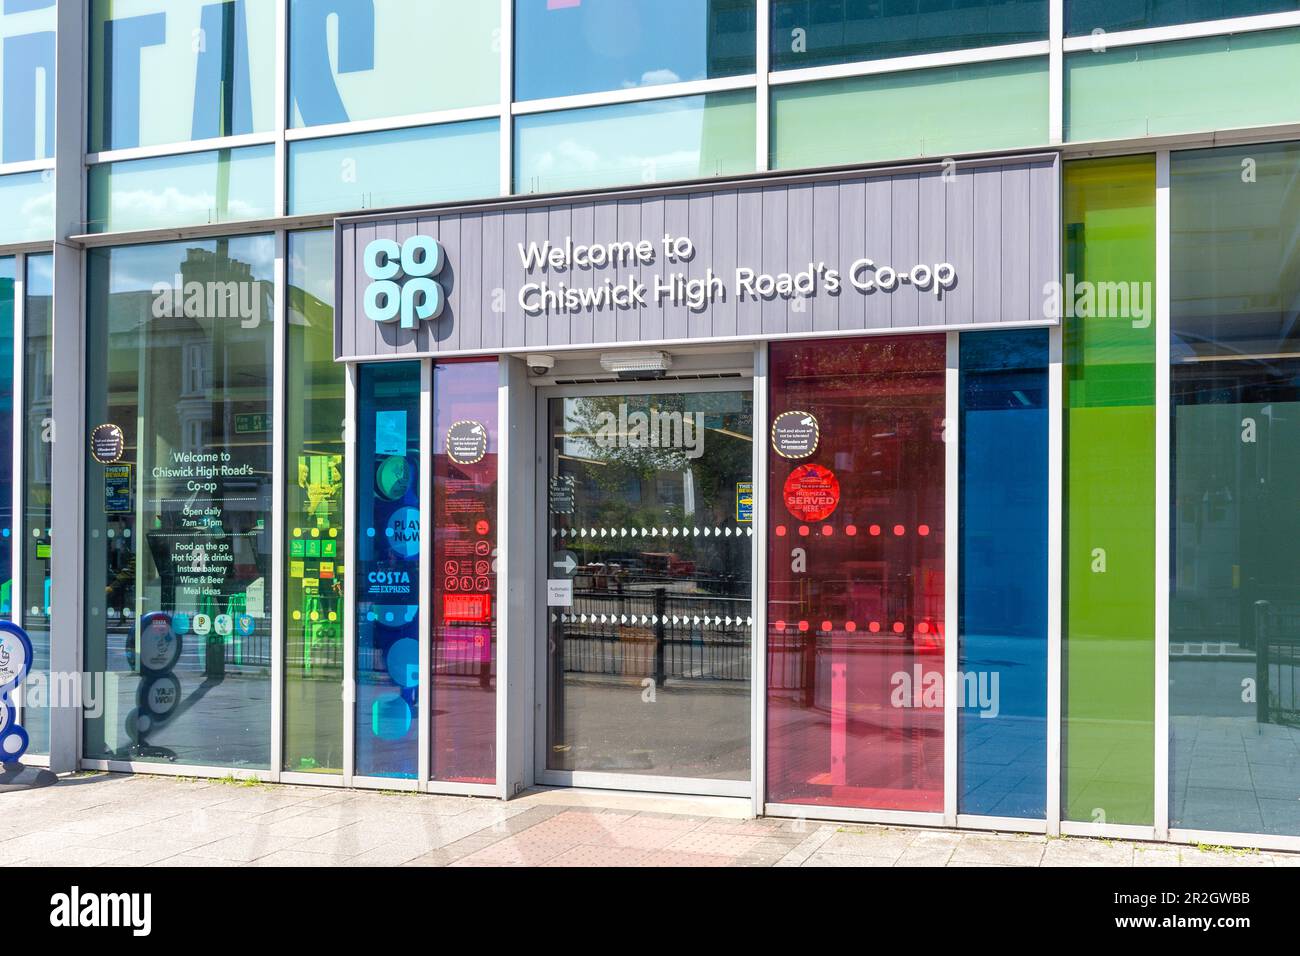 Entrance to Co-op Supermarket, Chiswick High Road, Chiswick, London Borough of Hounslow, Greater London, England, United Kingdom Stock Photo